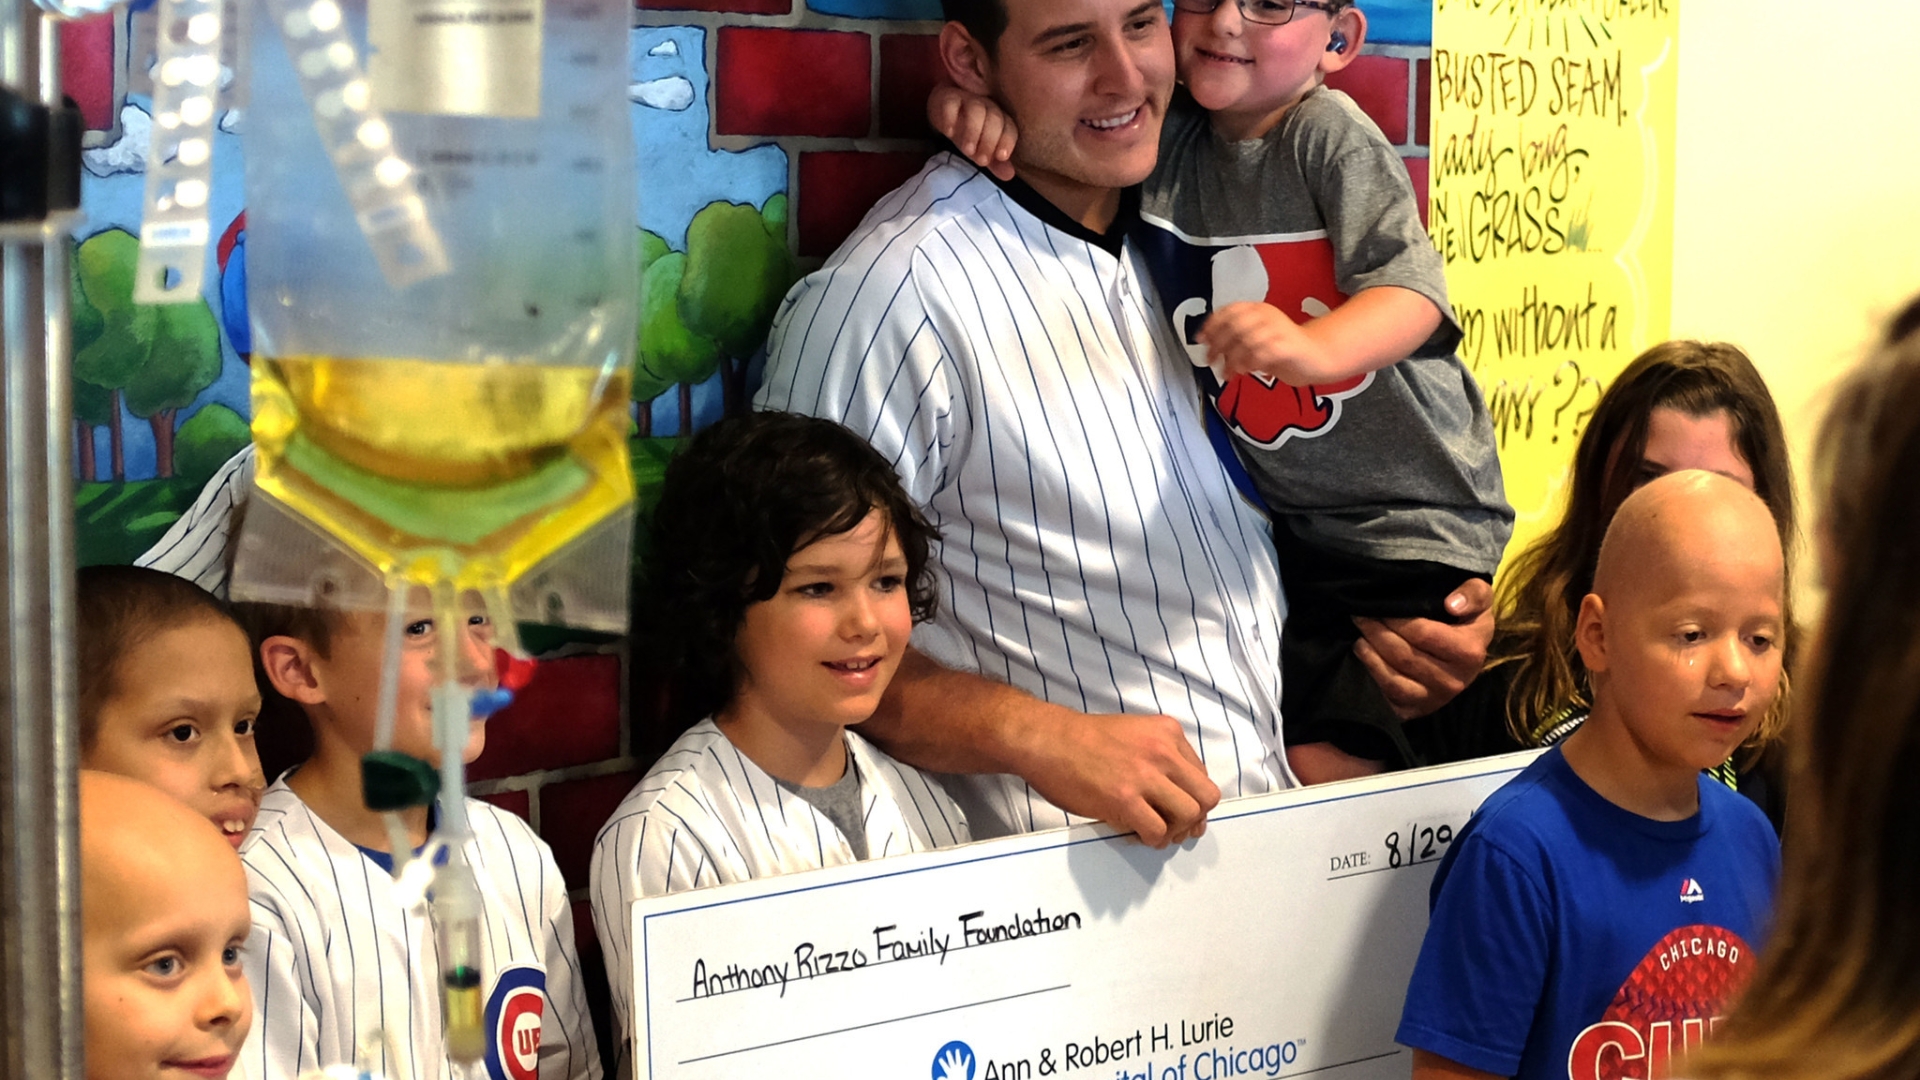 The Kids Helped By Anthony Rizzo's Foundation Made Signs for Cubs Players  Today - Bleacher Nation